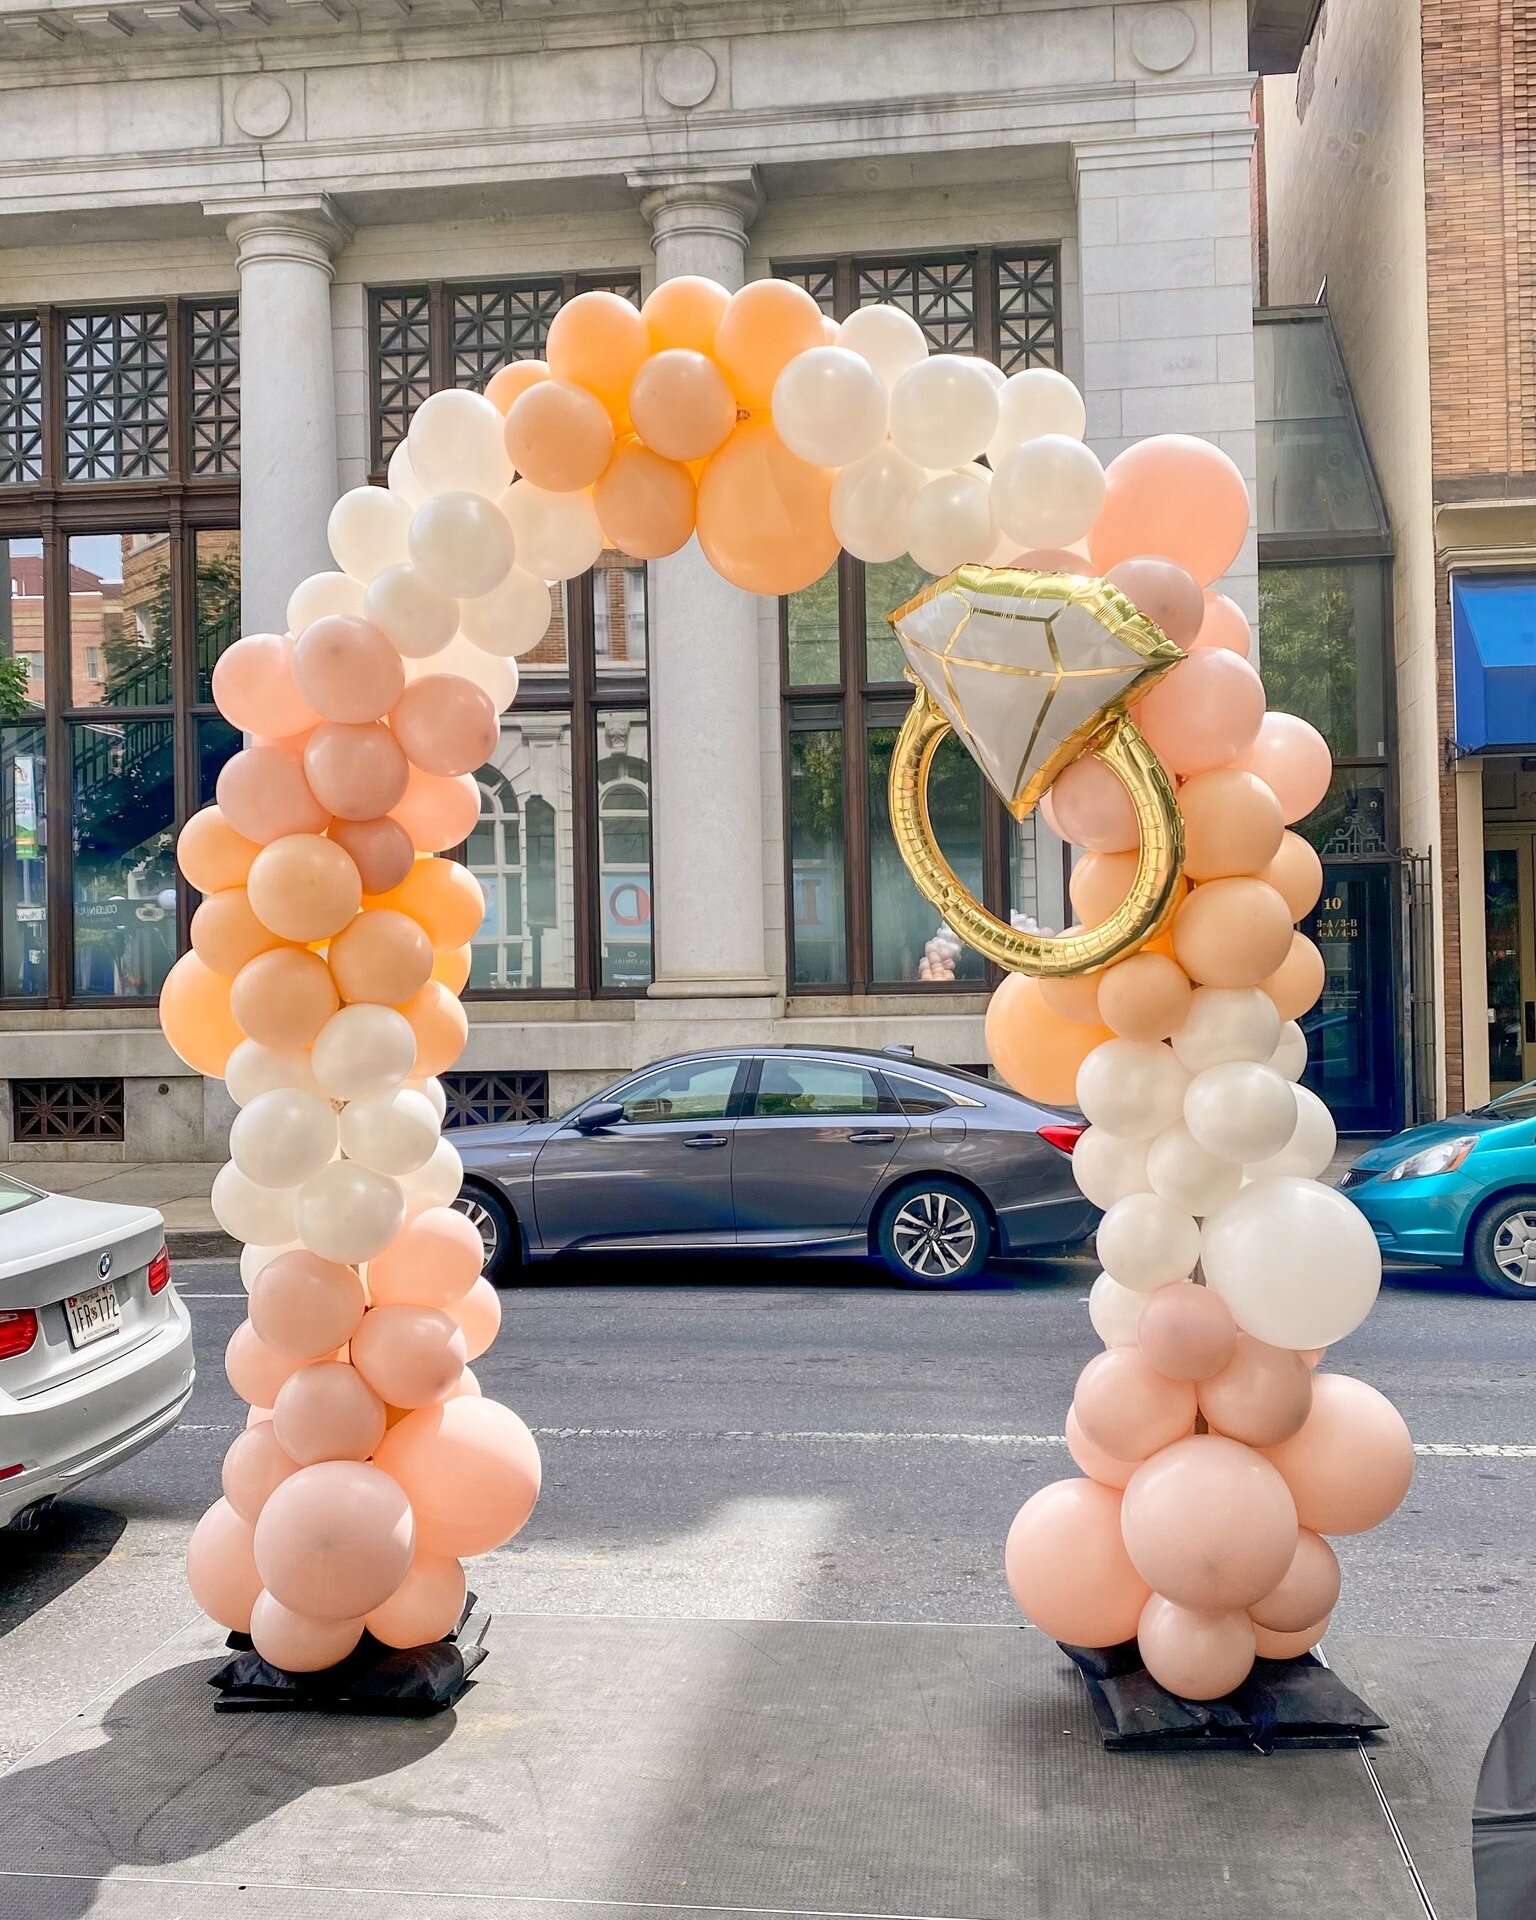 This soft color pallete is a whole vibe. 

Item: Narrow Organic Arch

#frederickmd #marylandballoons #marylandweddings #frederickmaryland #balloonarch #balloongarland #ballooncolumn